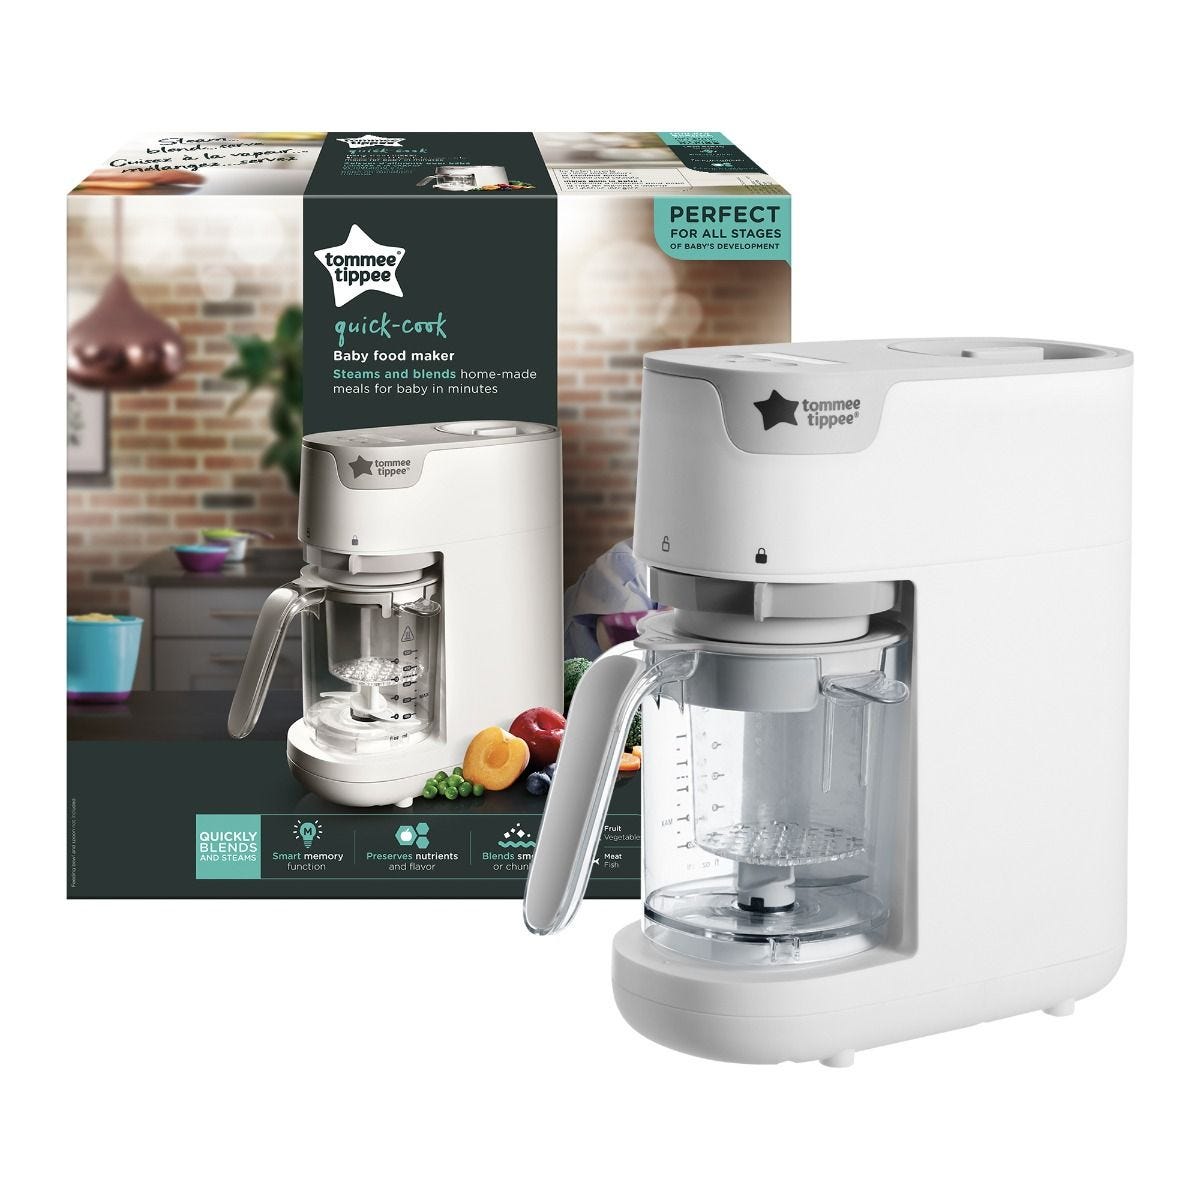 TOMMEE TIPPE QUICK-COOK BABY FOOD MAKER